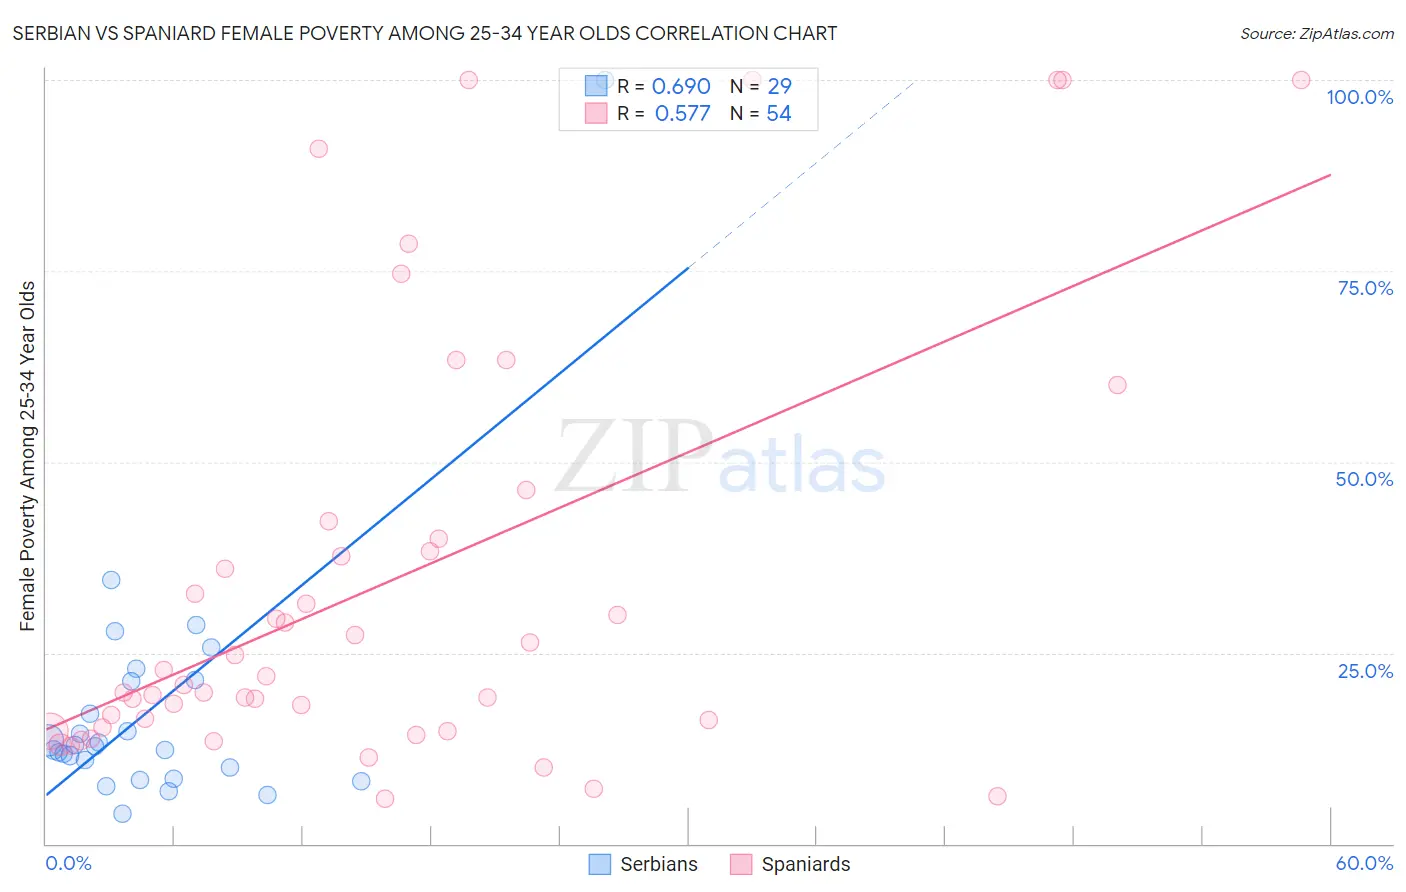 Serbian vs Spaniard Female Poverty Among 25-34 Year Olds